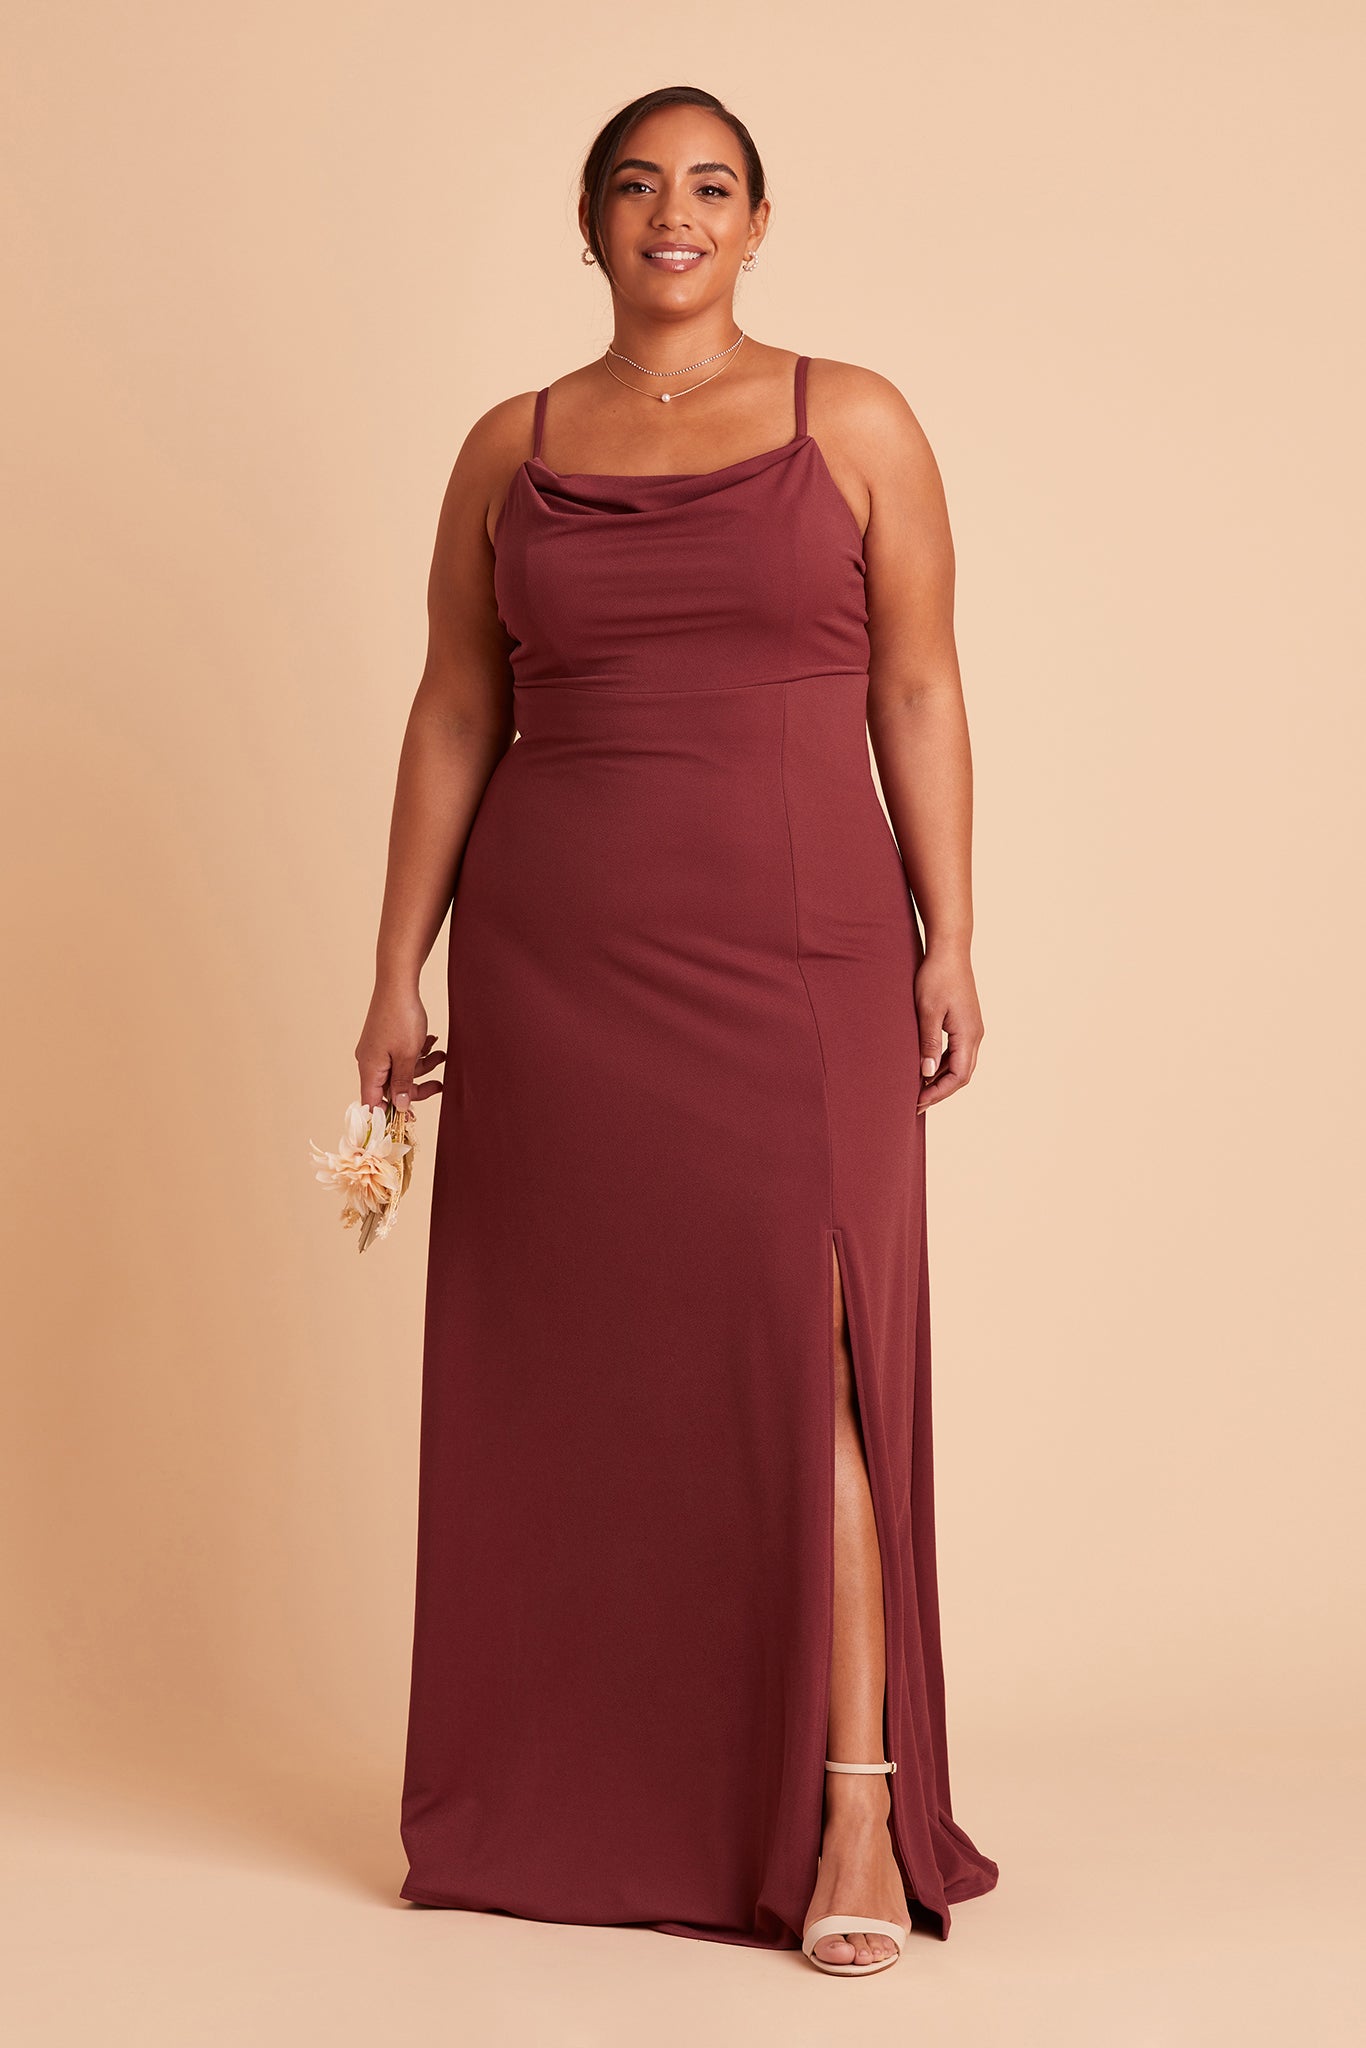 Ash plus size bridesmaid dress with slit in rosewood crepe by Birdy Grey, front view